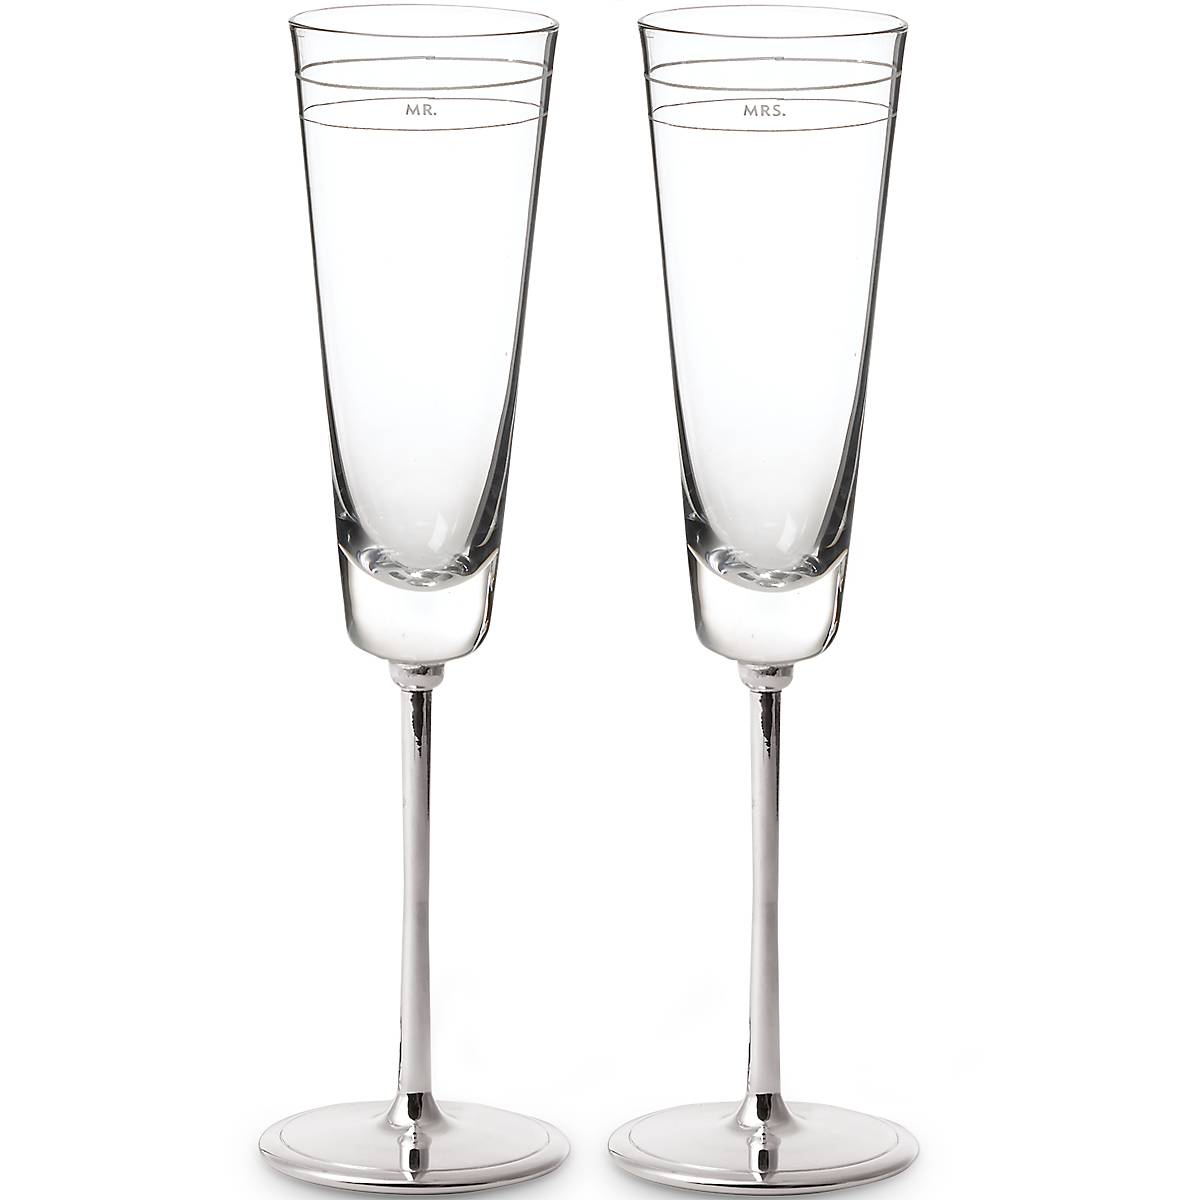 Wediquette and Parties: It's All In the Details: Champagne Toasting Flutes